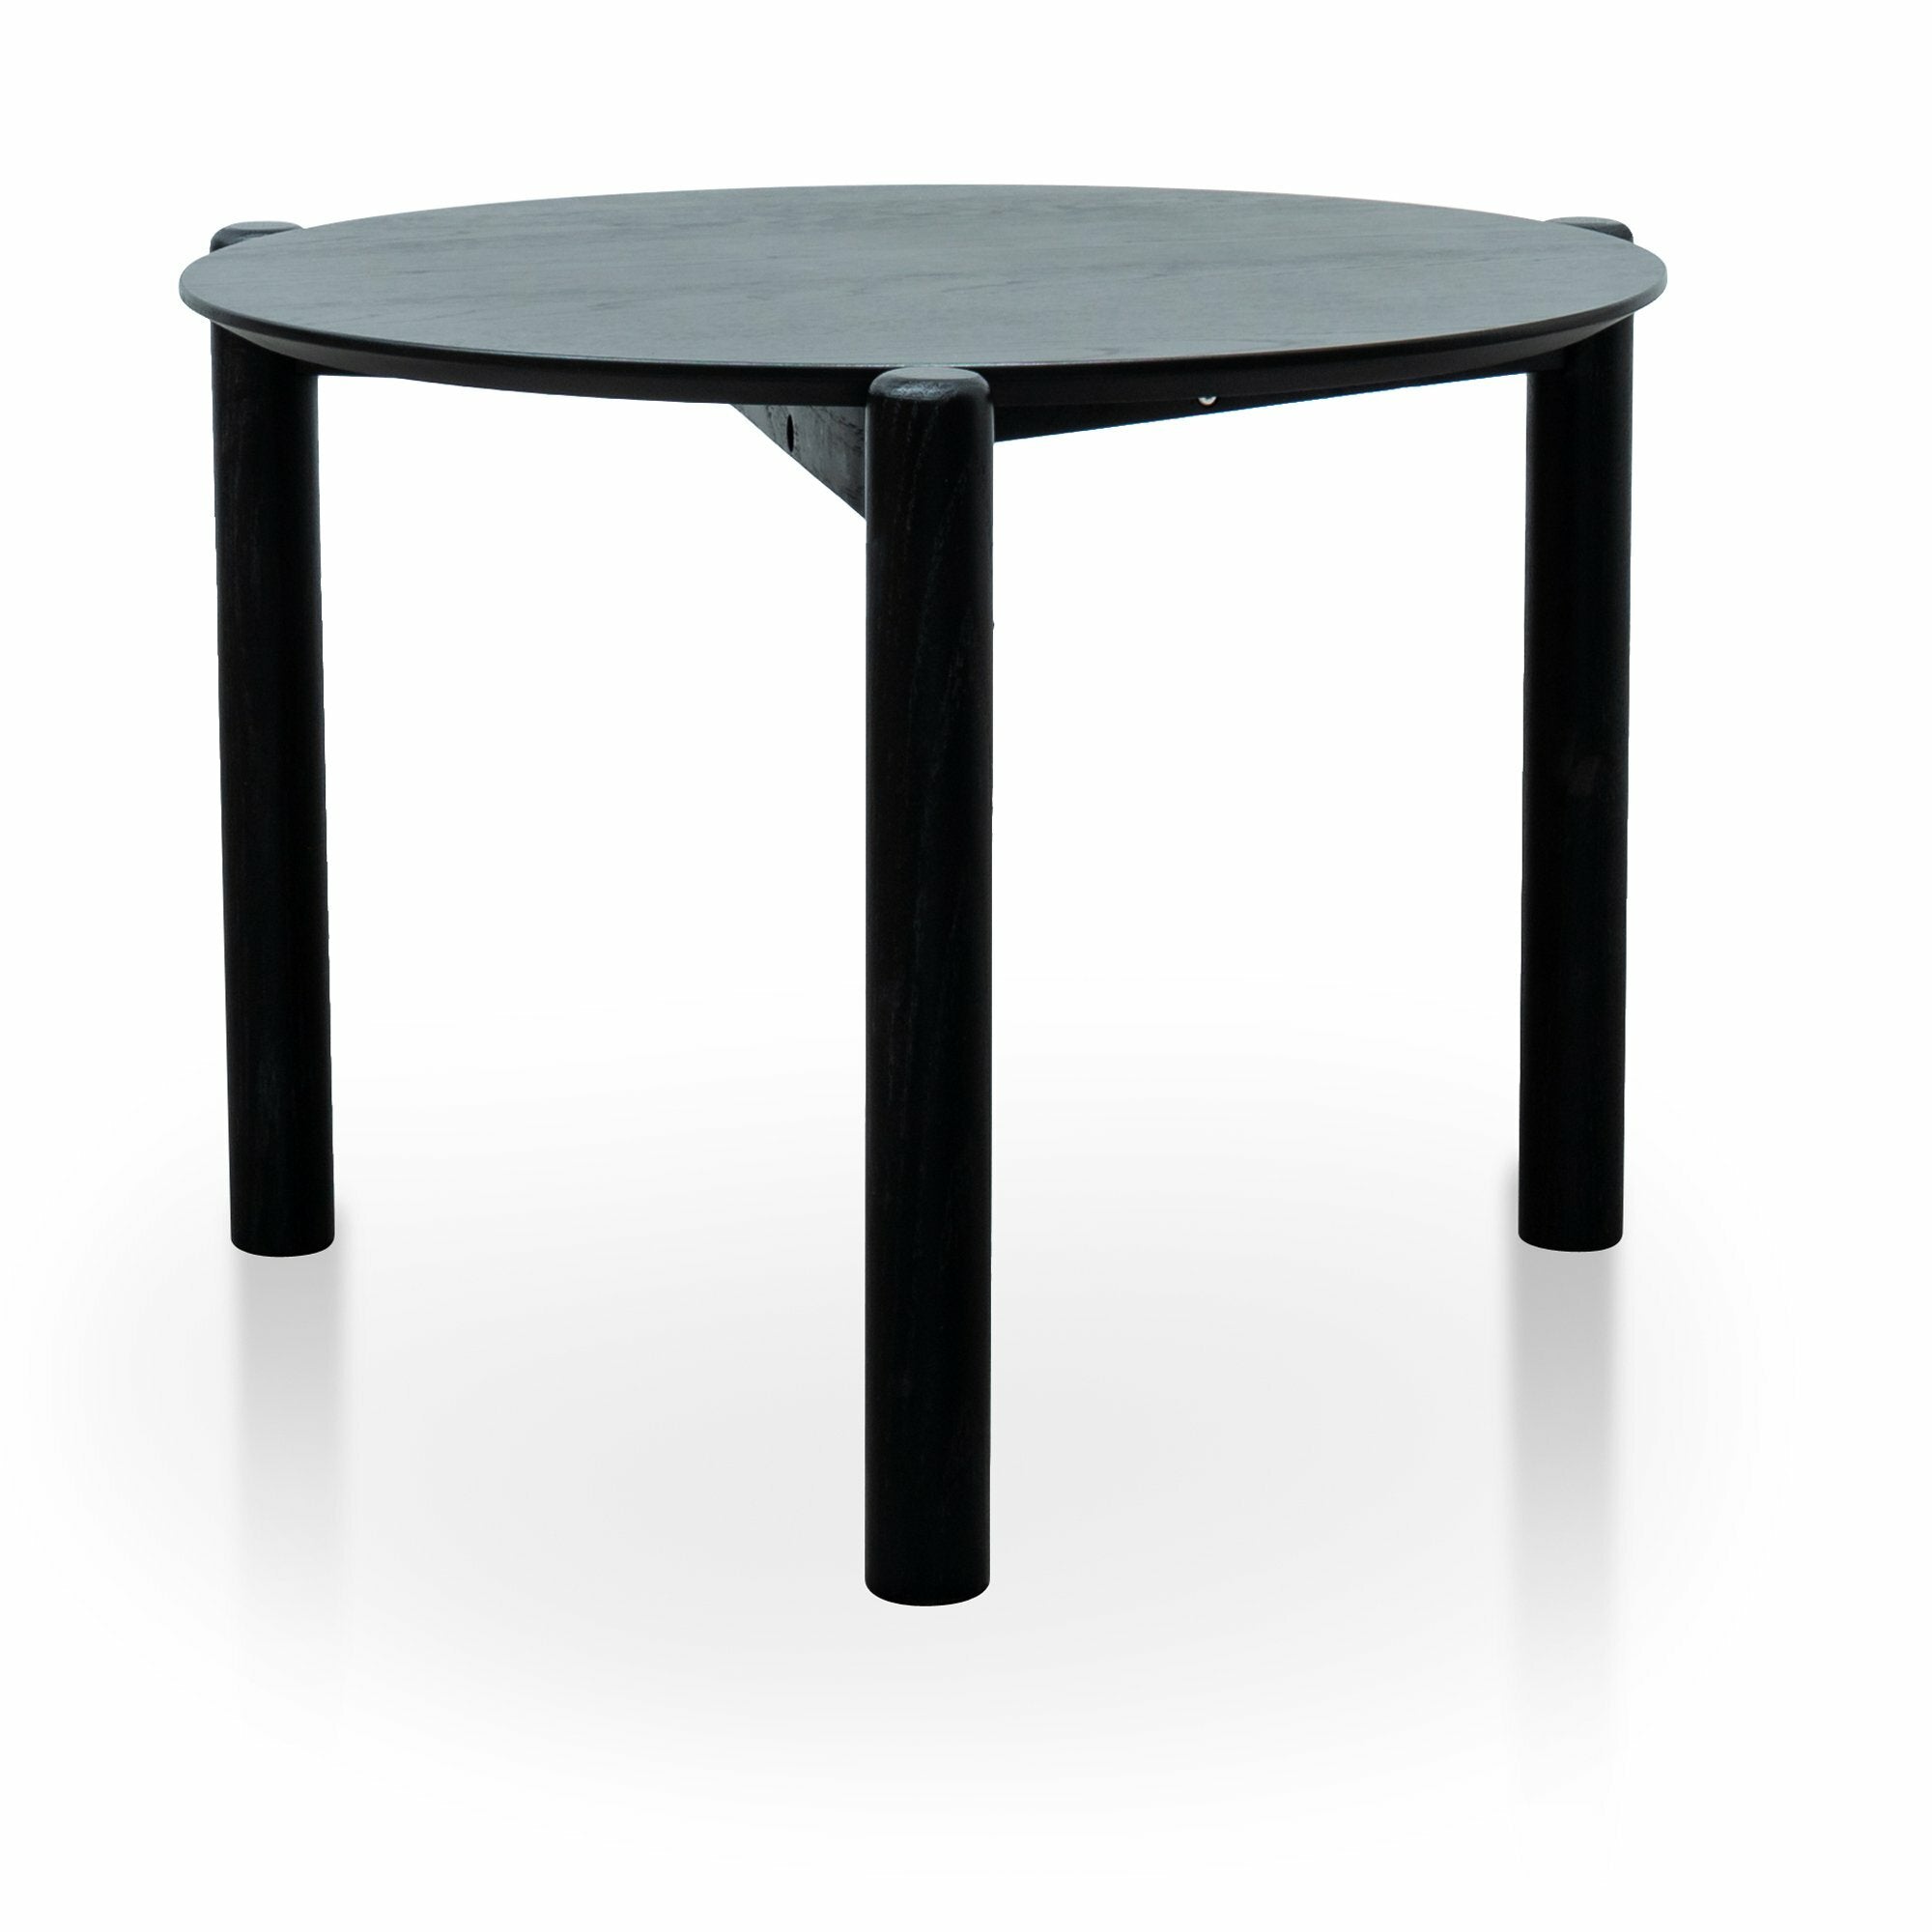 Holloway - Nest of Coffee tables - Black